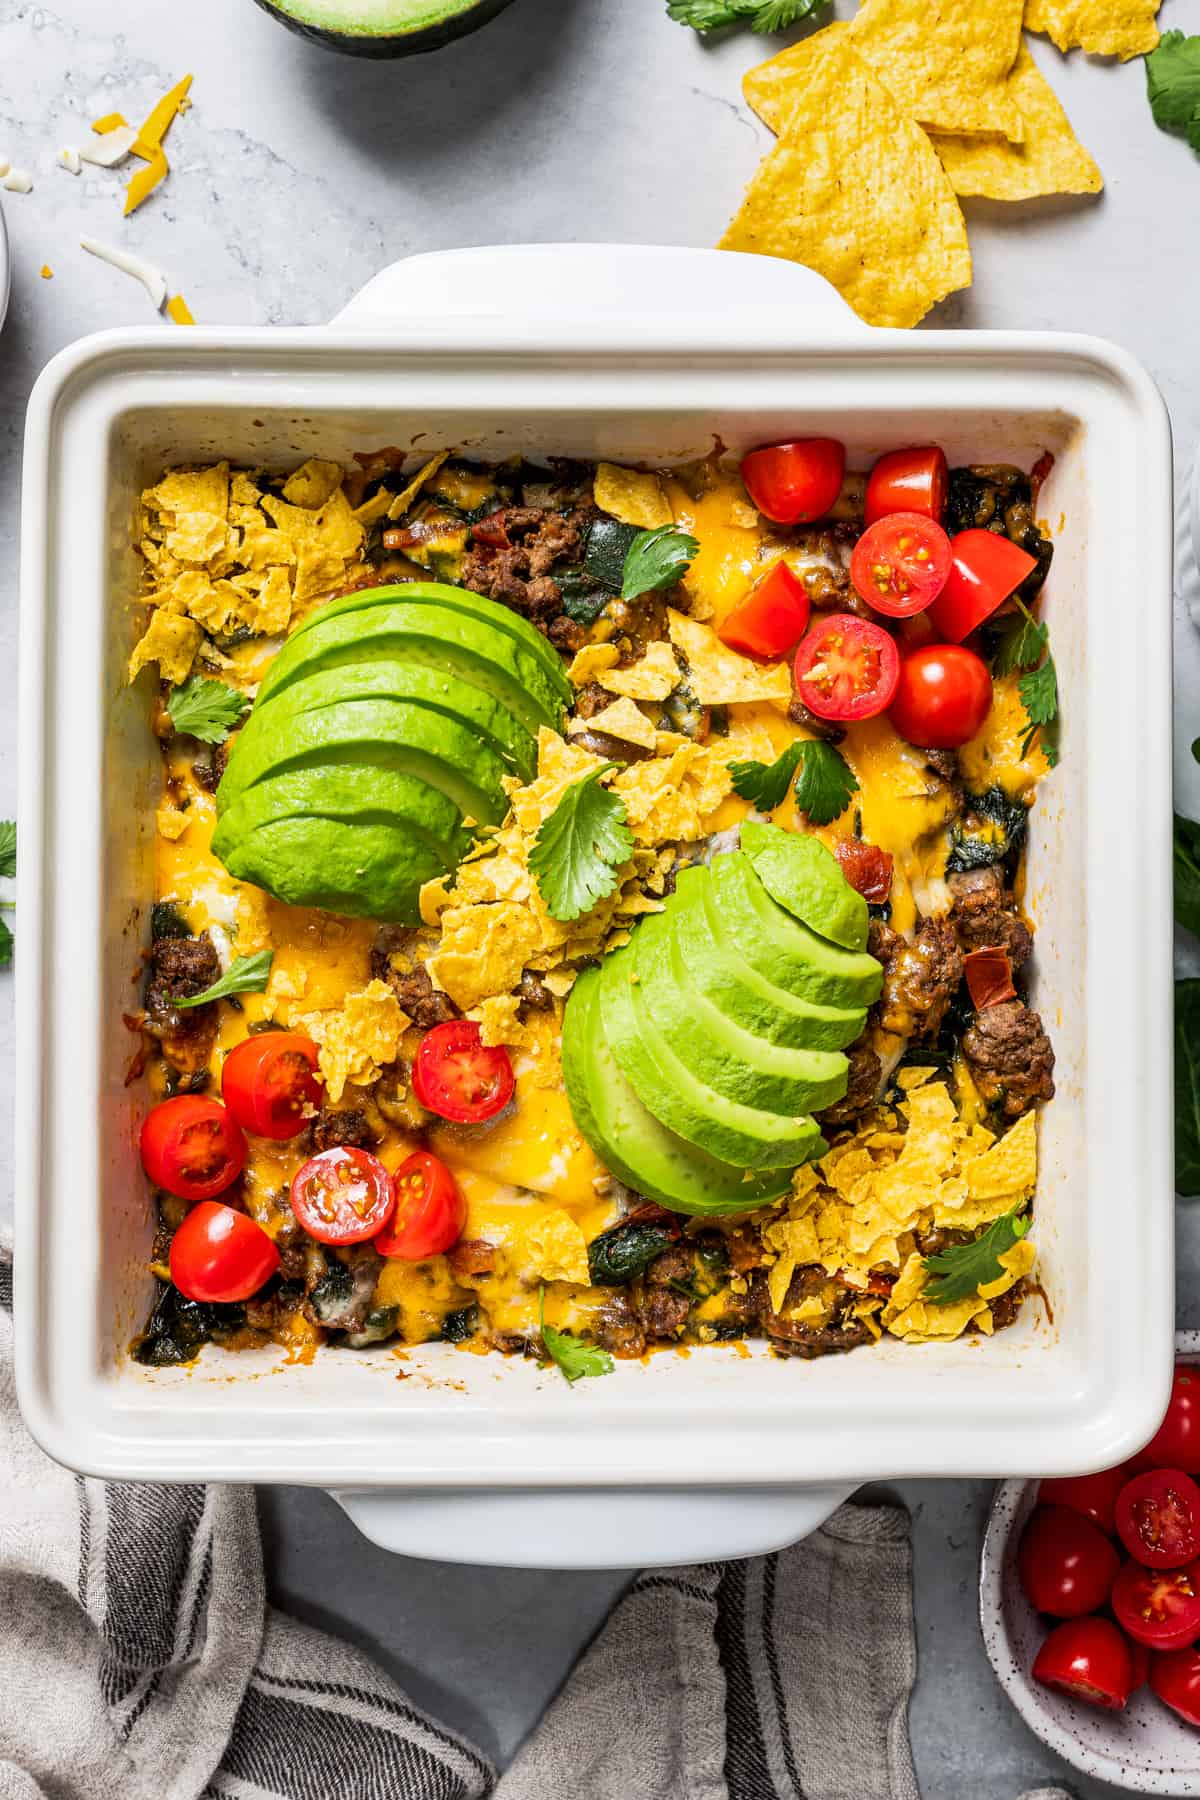 Overhead view of a baked taco casserole in a square baking dish topped with sliced avocados, cherry tomatoes, and fresh cilantro.